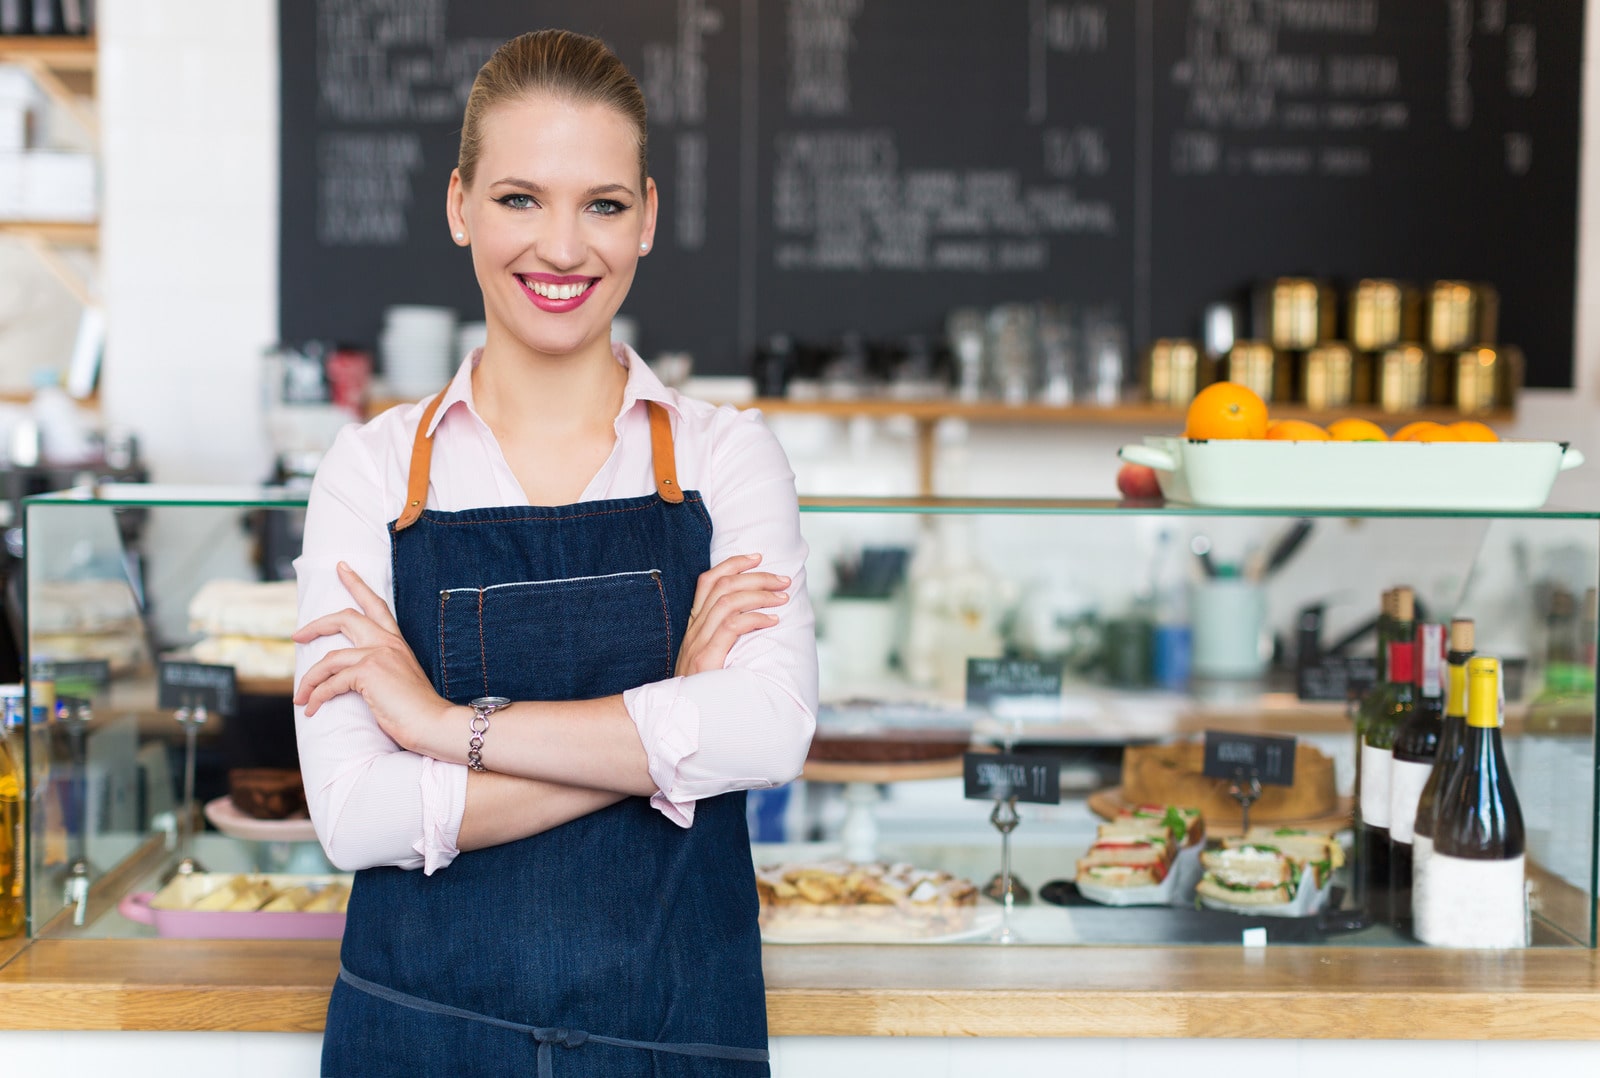 Small Business Loan Tips